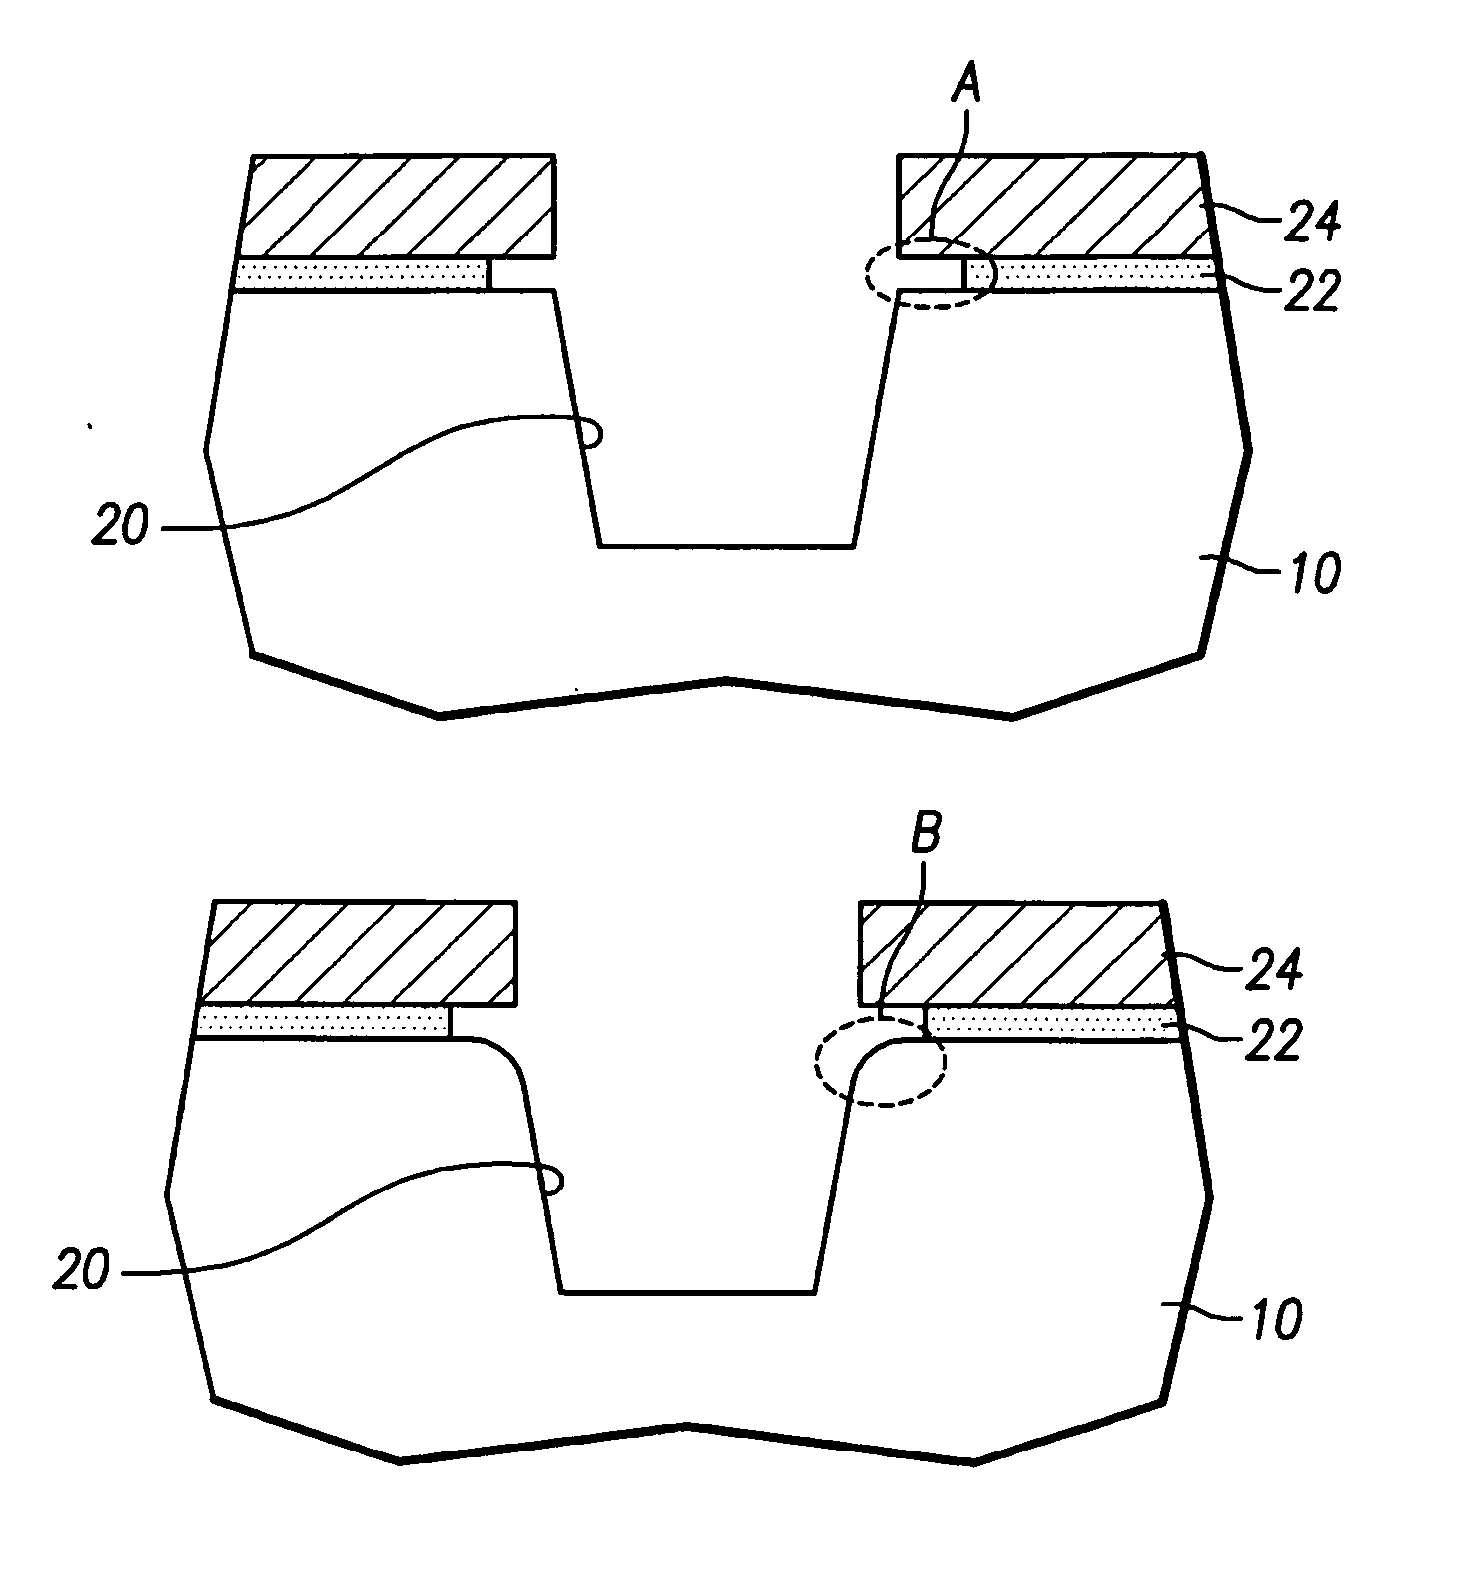 Method for forming shallow trench isolation in semiconductor device